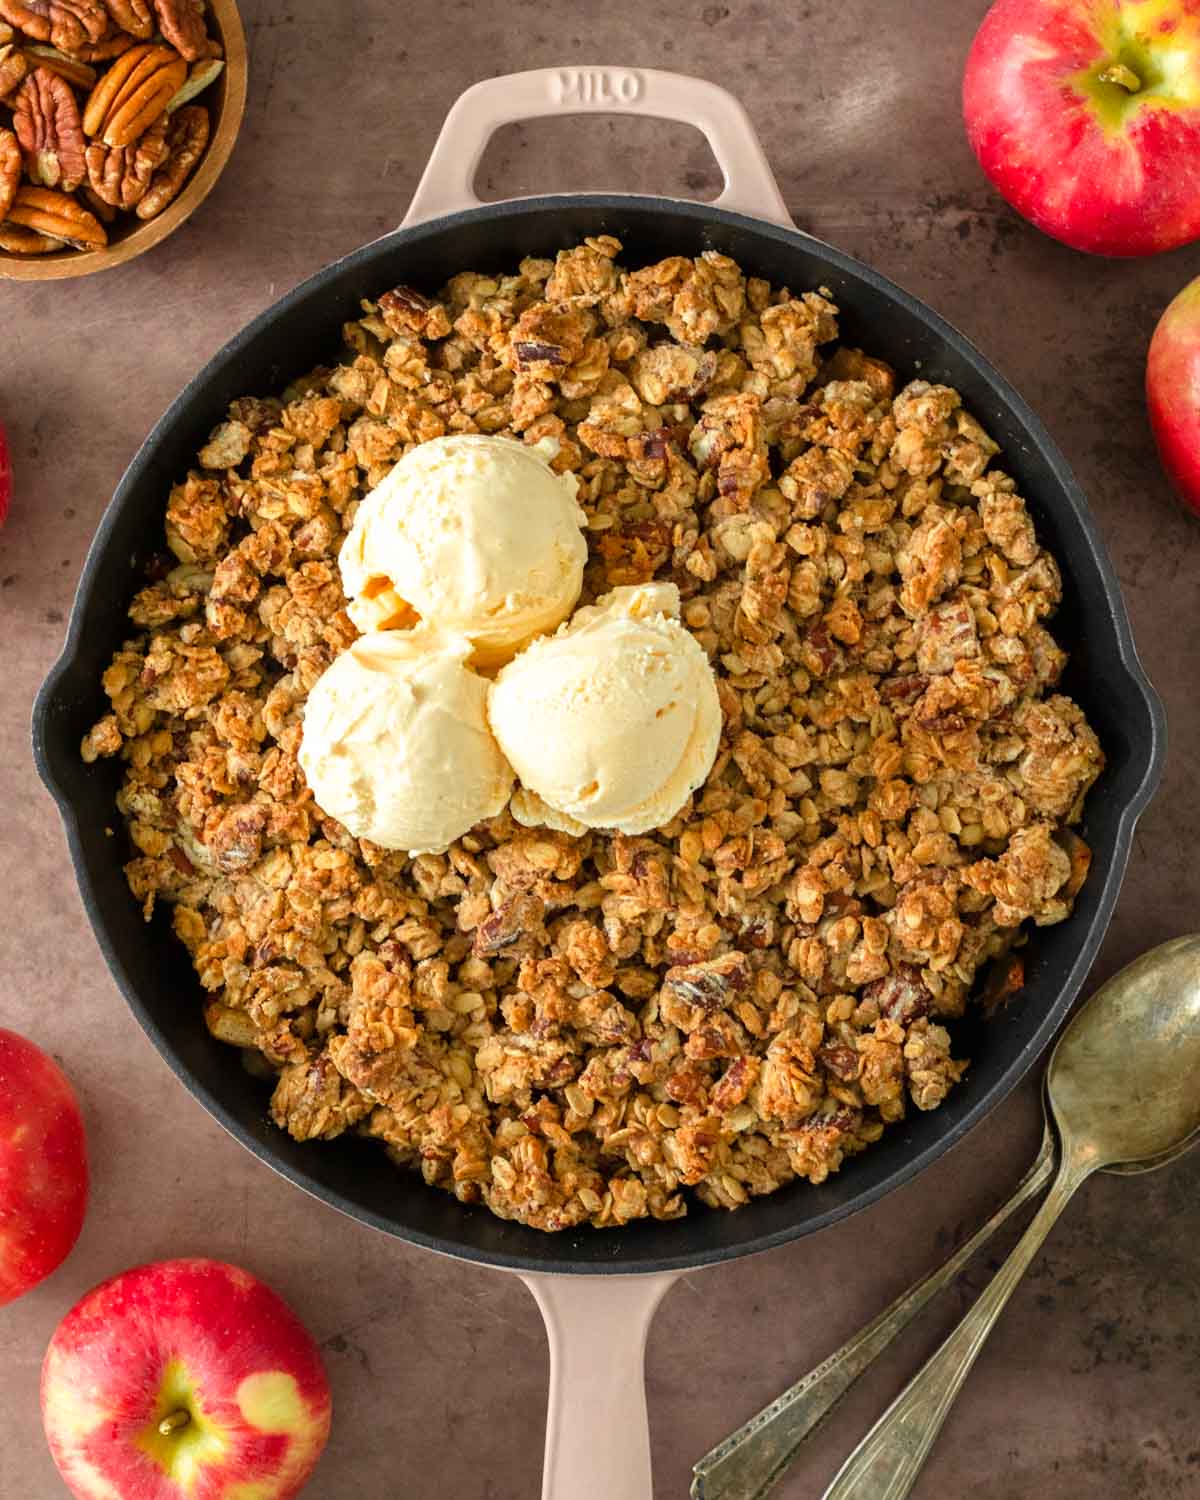 This skillet apple crisp is a classic fall dessert made with freshly picked apples tossed in maple syrup and cinnamon and baked in a skillet with a flavorful crisp topping.